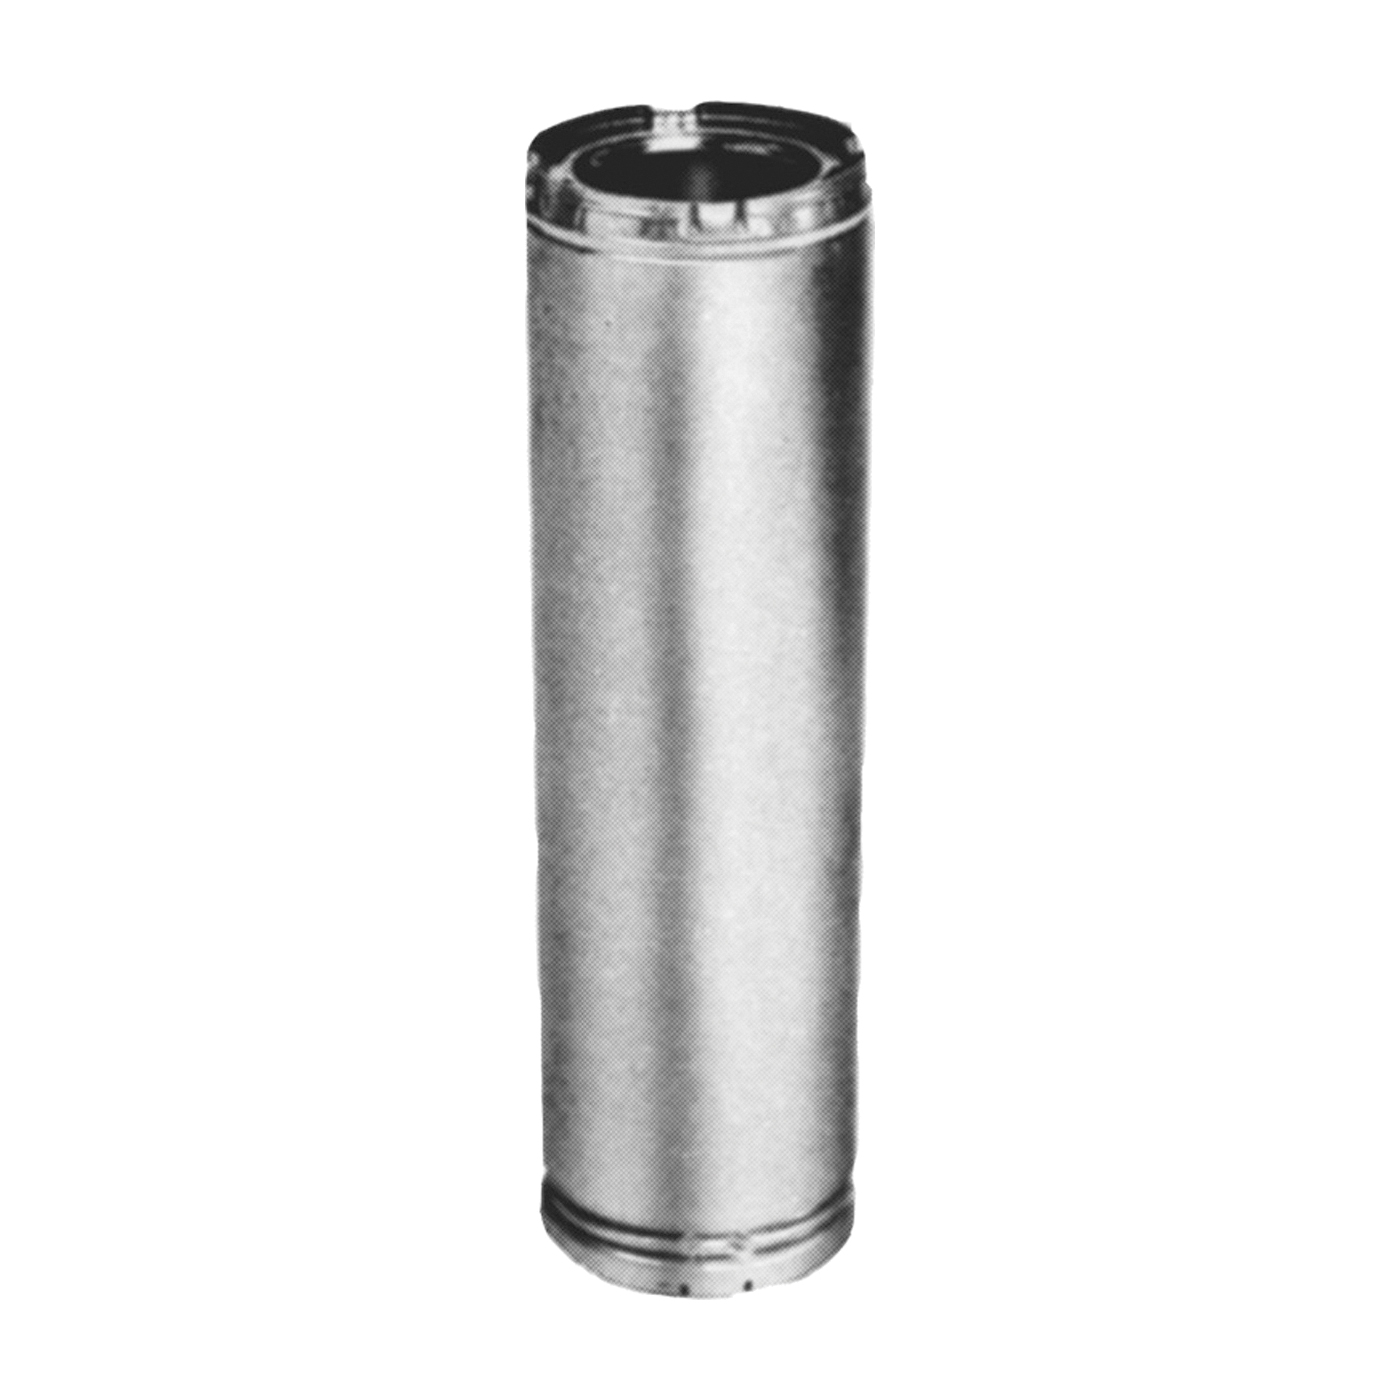 8HS-24 Chimney Pipe, 11 in OD, 24 in L, Galvanized Stainless Steel